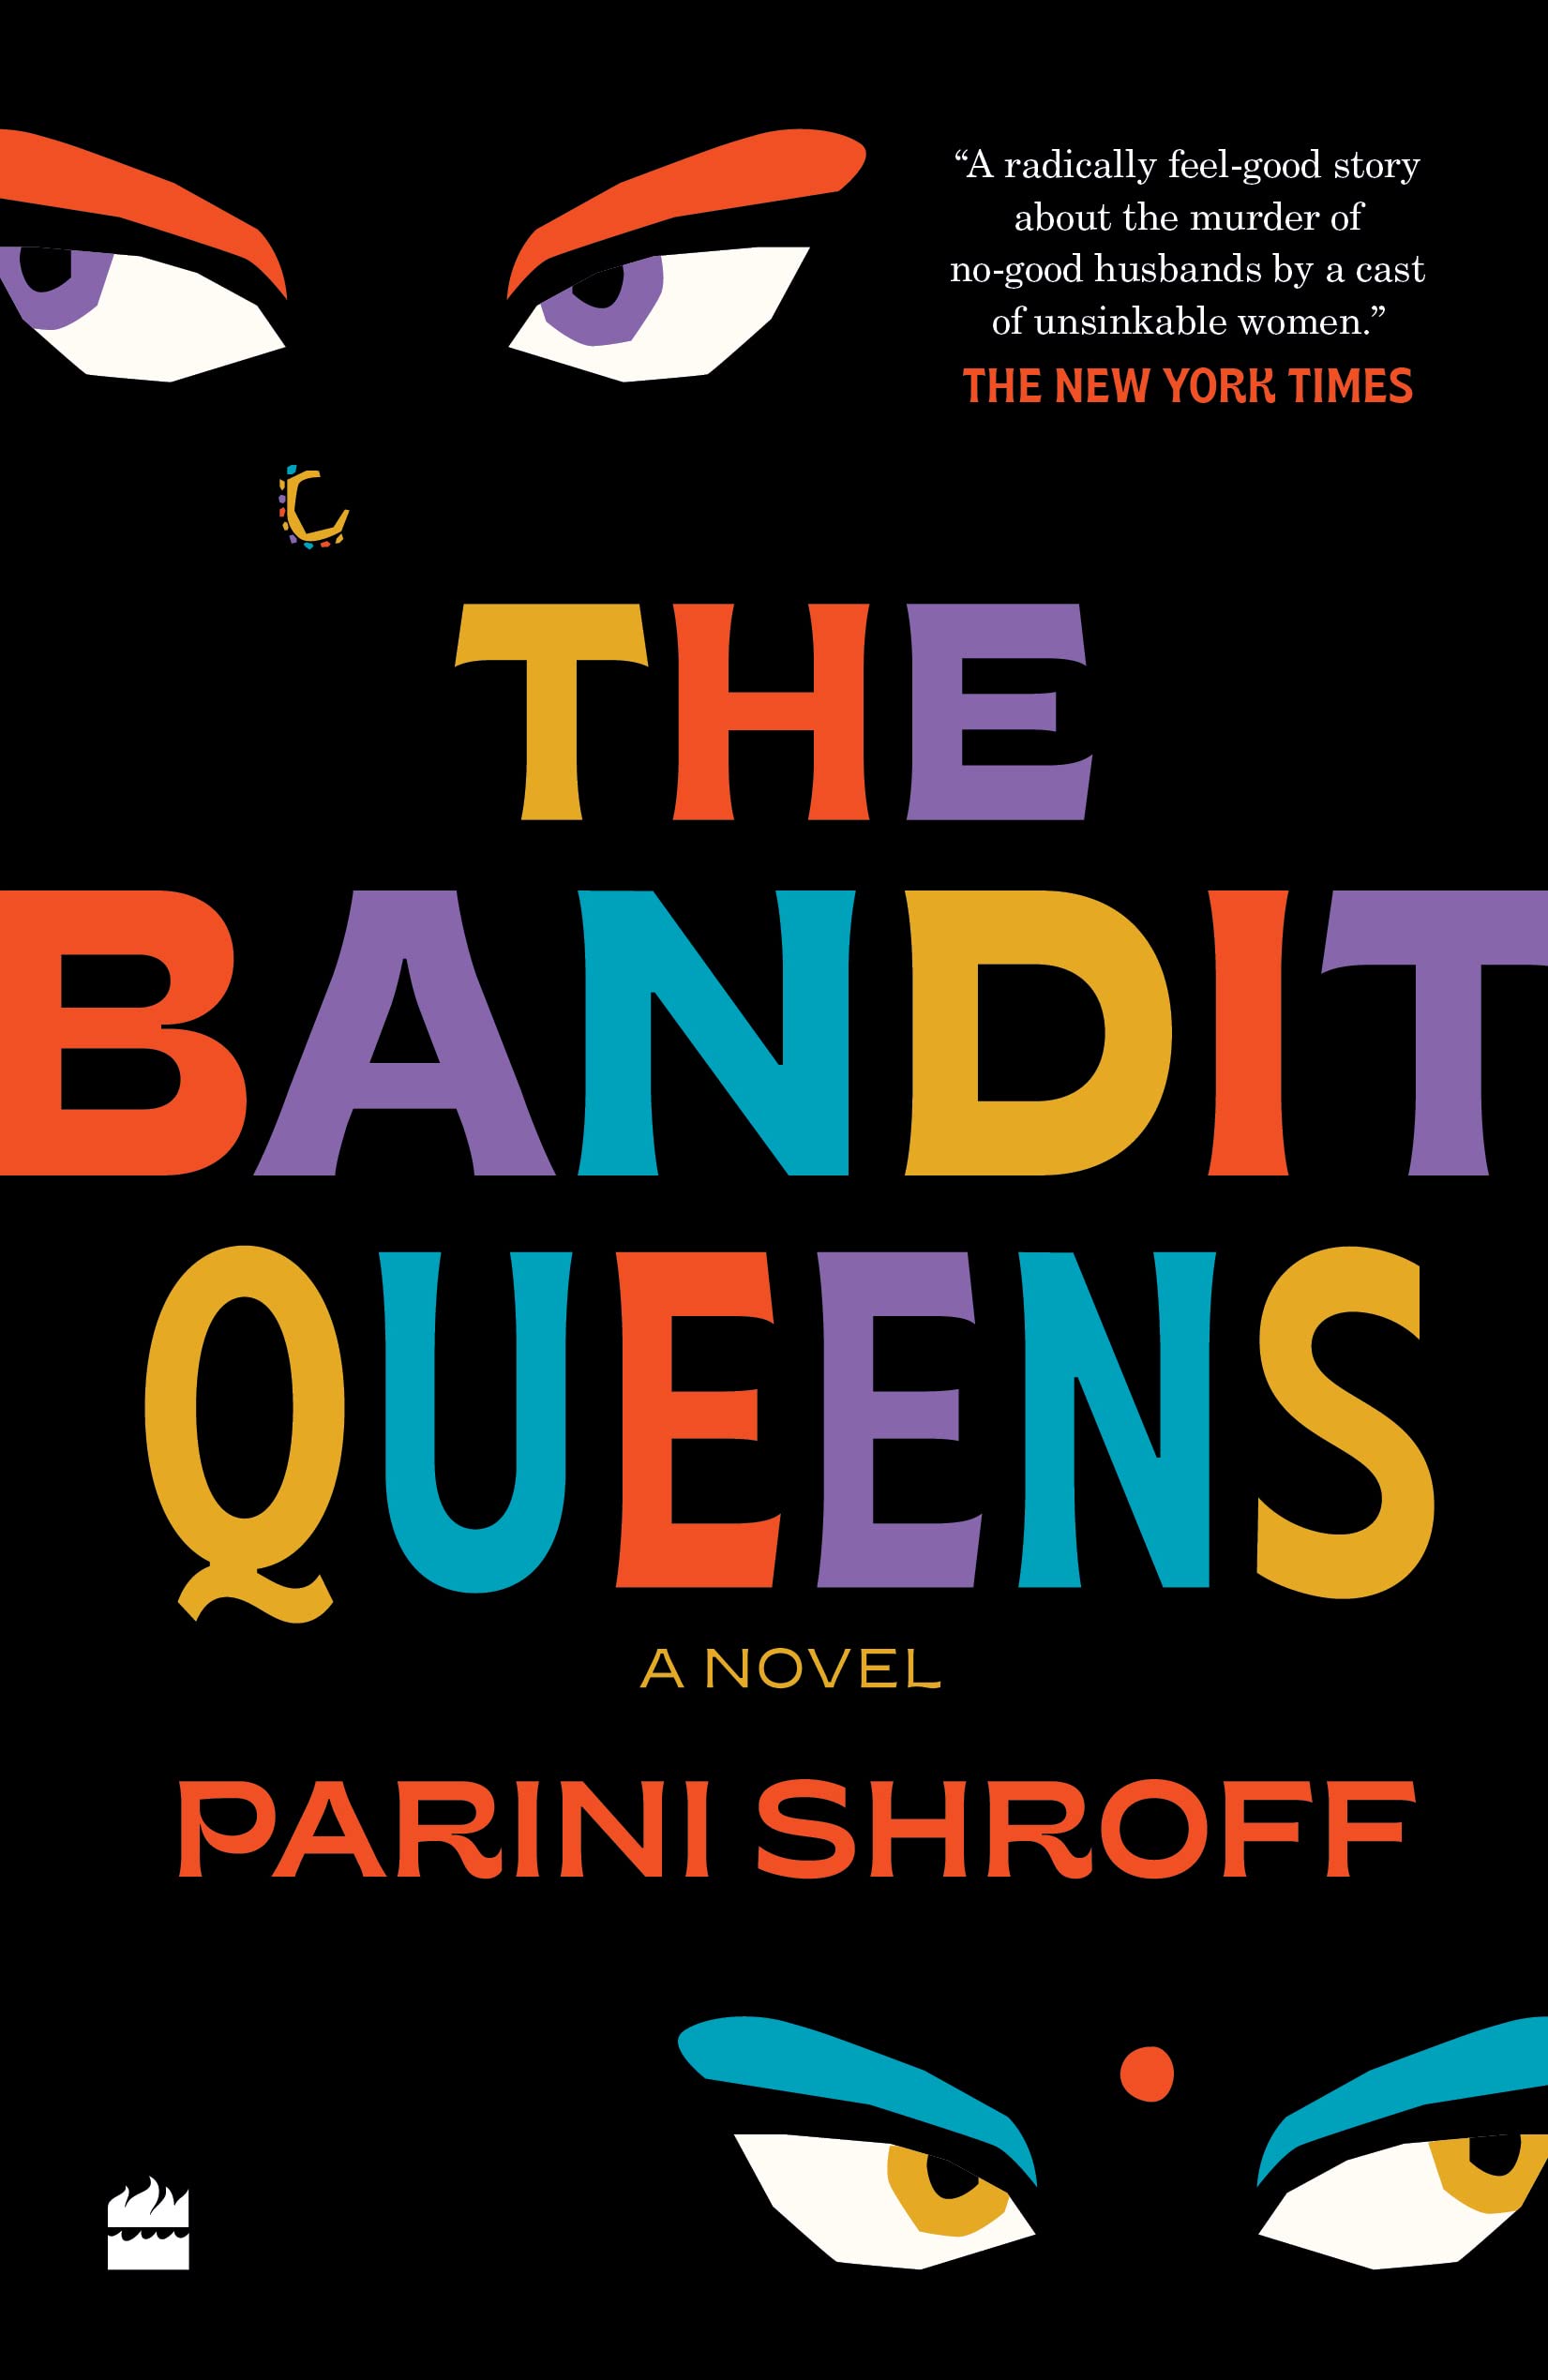 Read an excerpt from Parini Shroff's novel "The Bandit Queens", longlisted for the prestigious Women’s Prize for Fiction